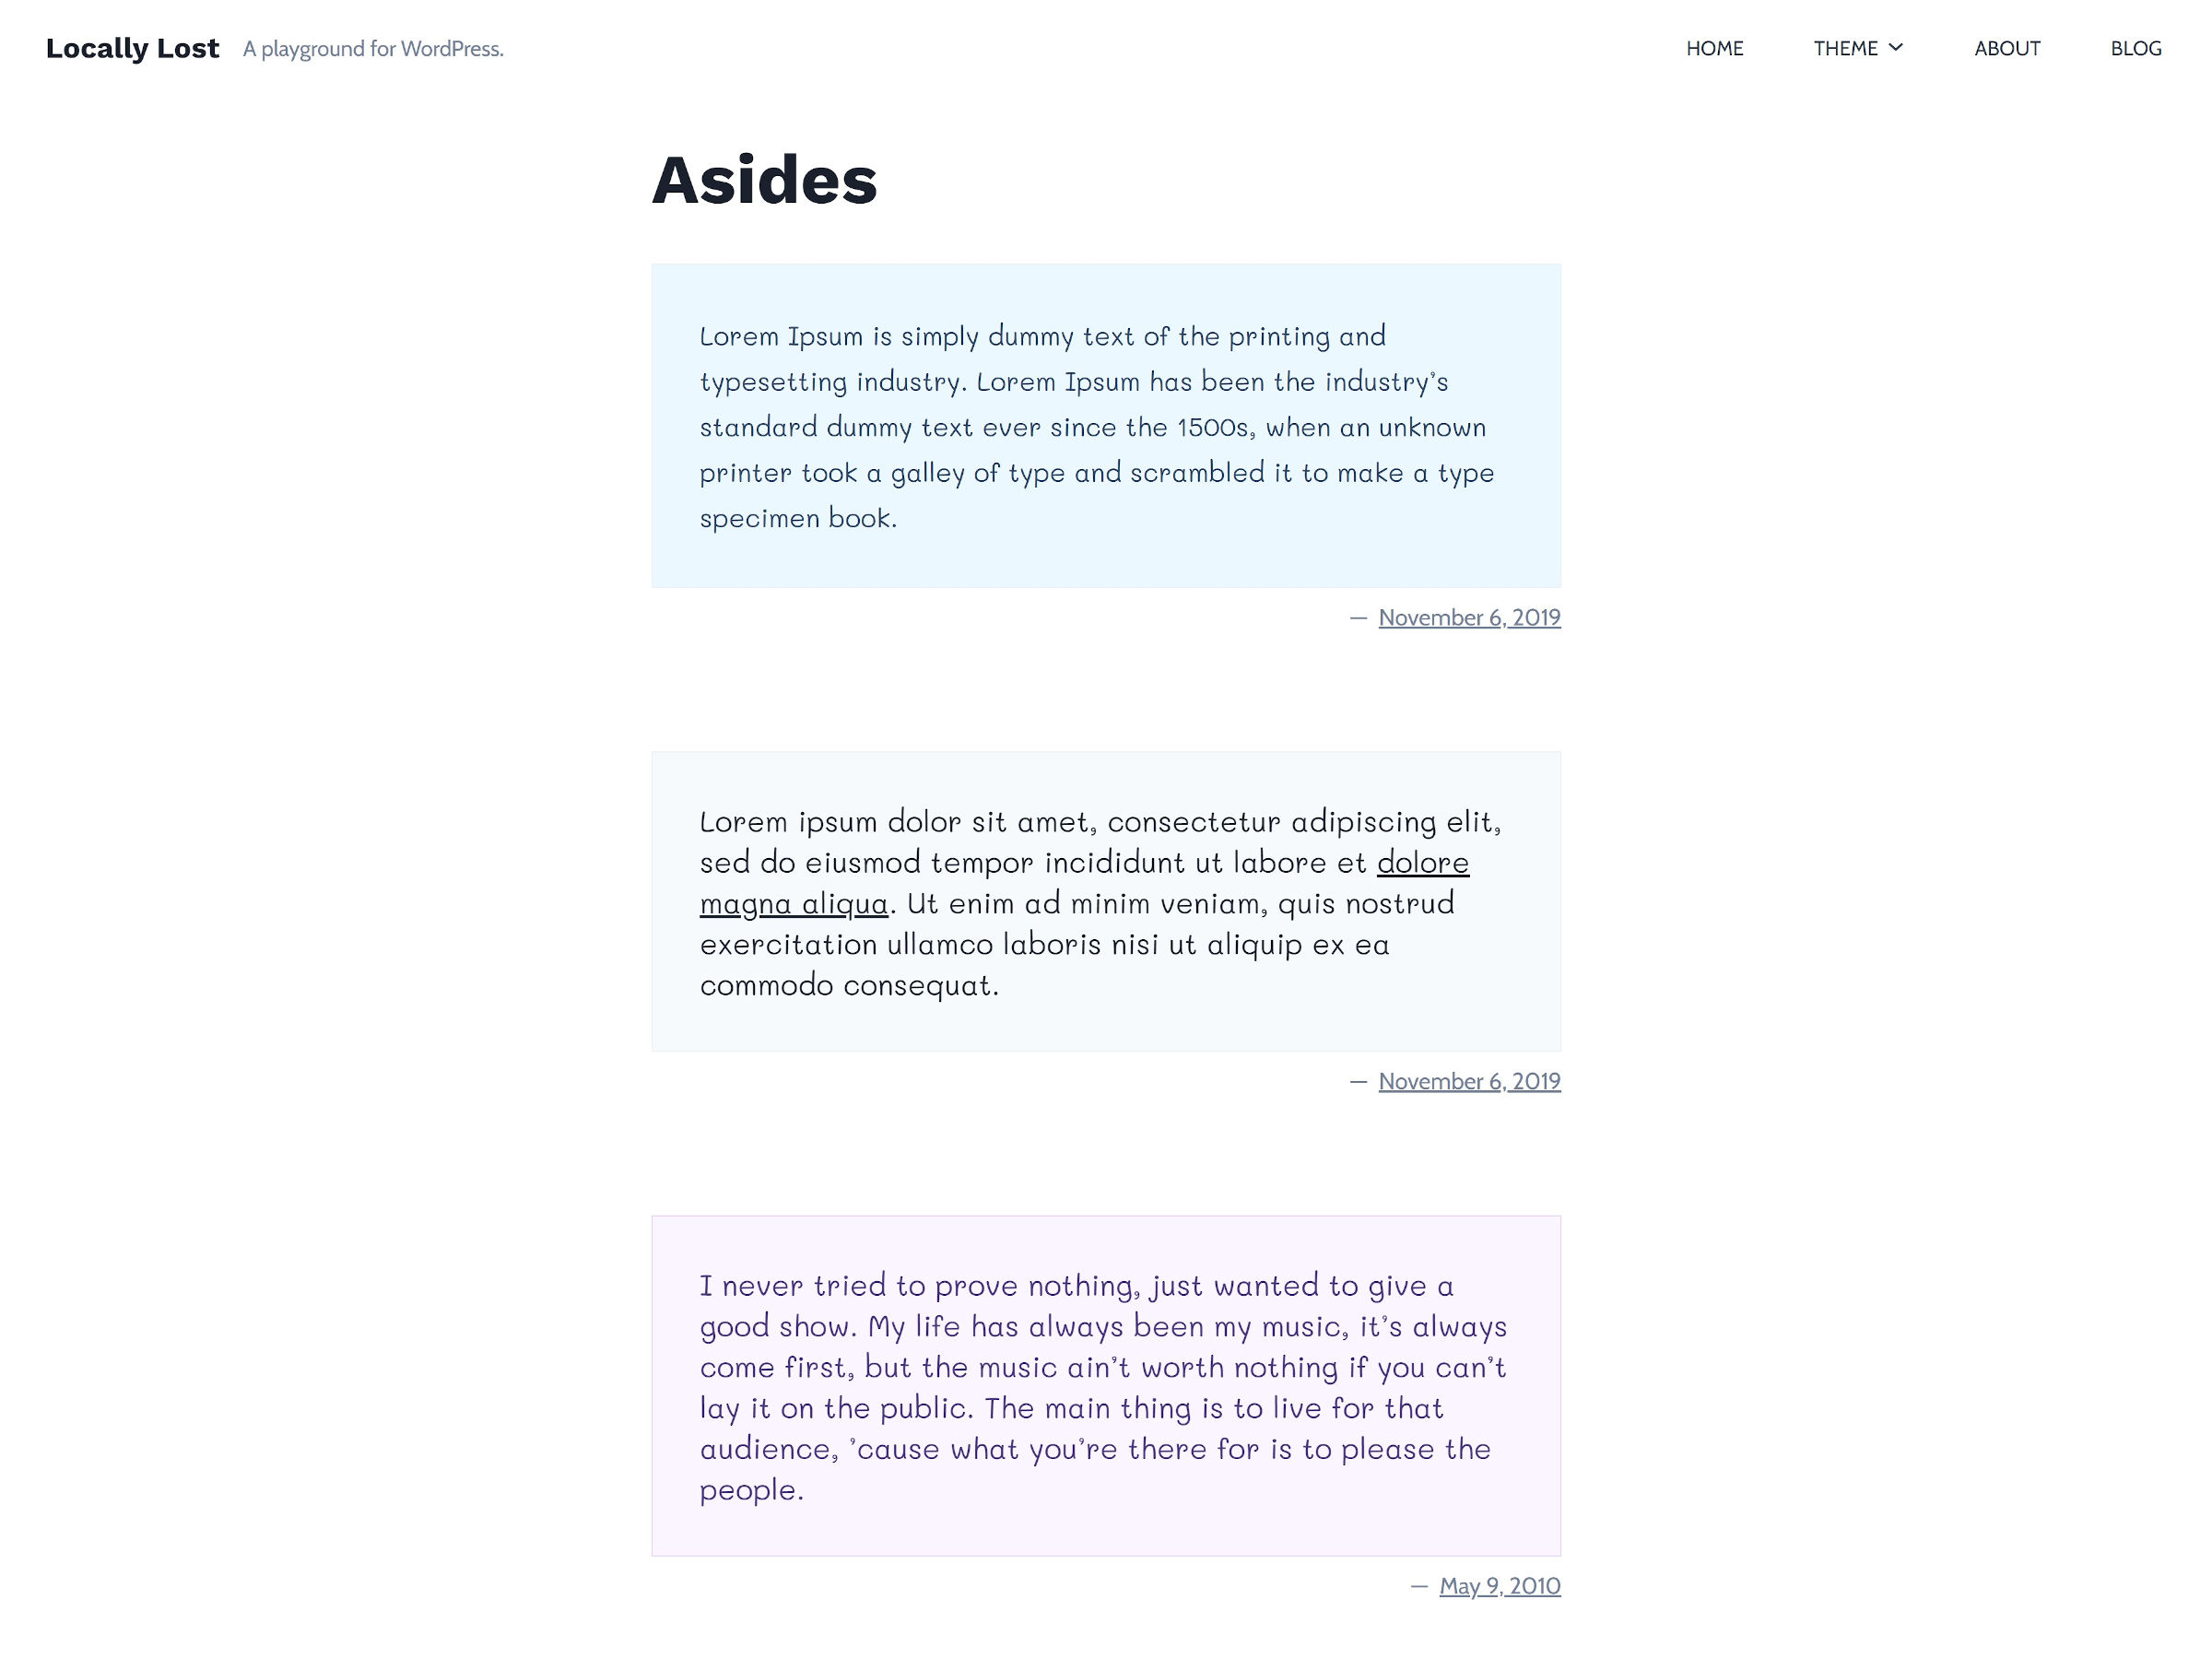 Archive page in WordPress showing aside posts, each with a different-colored background.